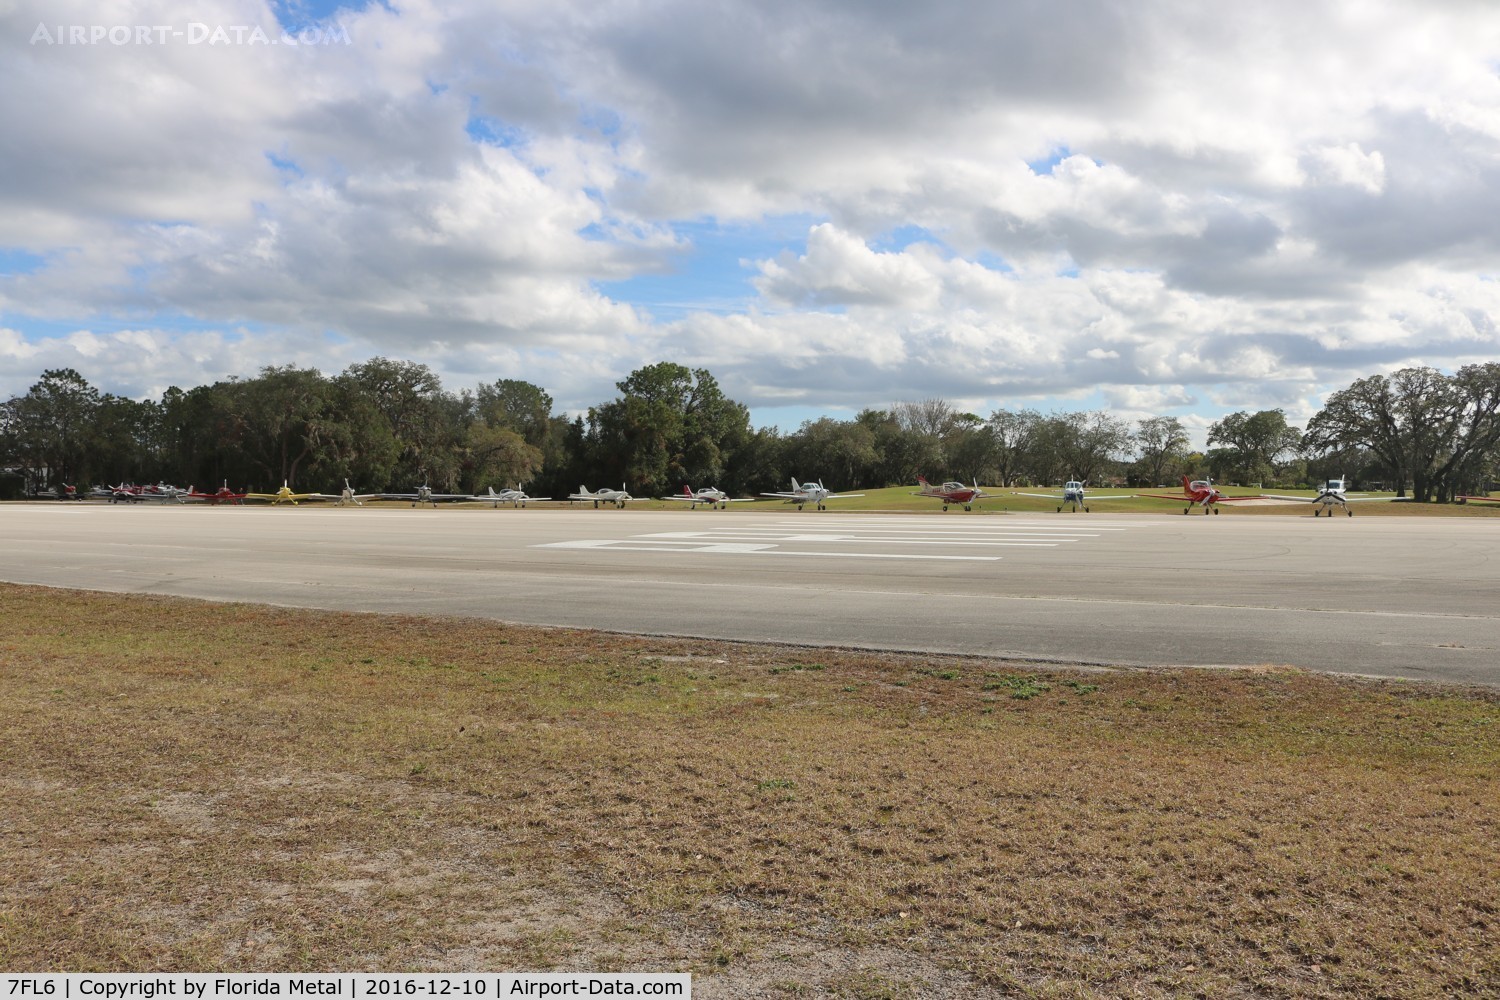 Spruce Creek Airport (7FL6) - aircraft lined up for the gaggle flight